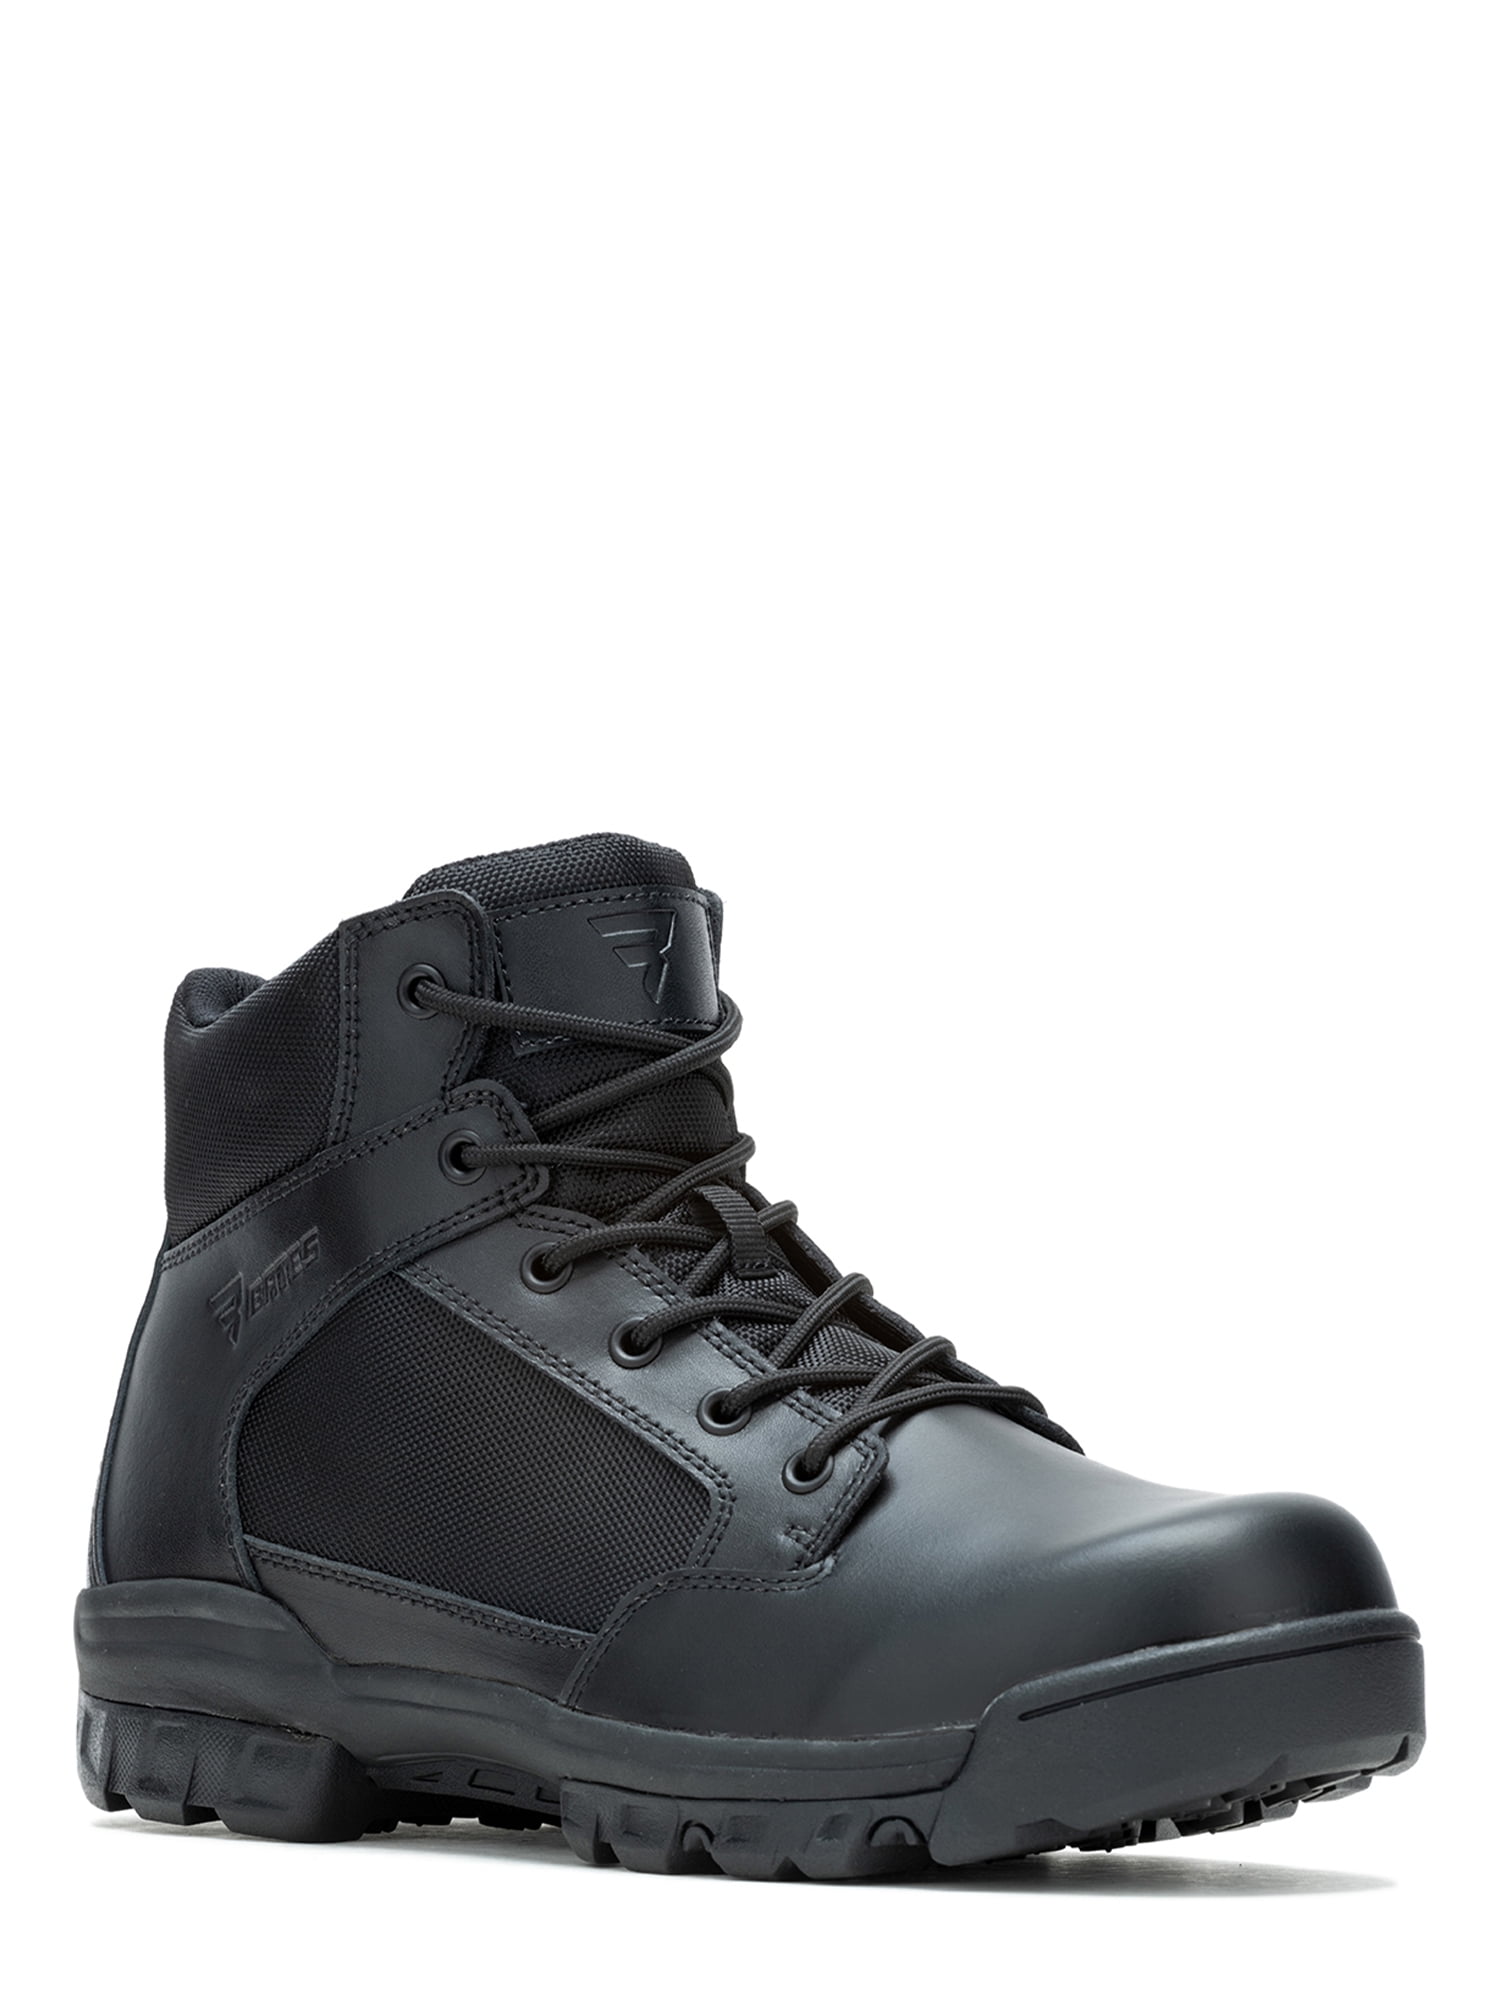 Men's 15 in Legacy Boot Size 5(M) 